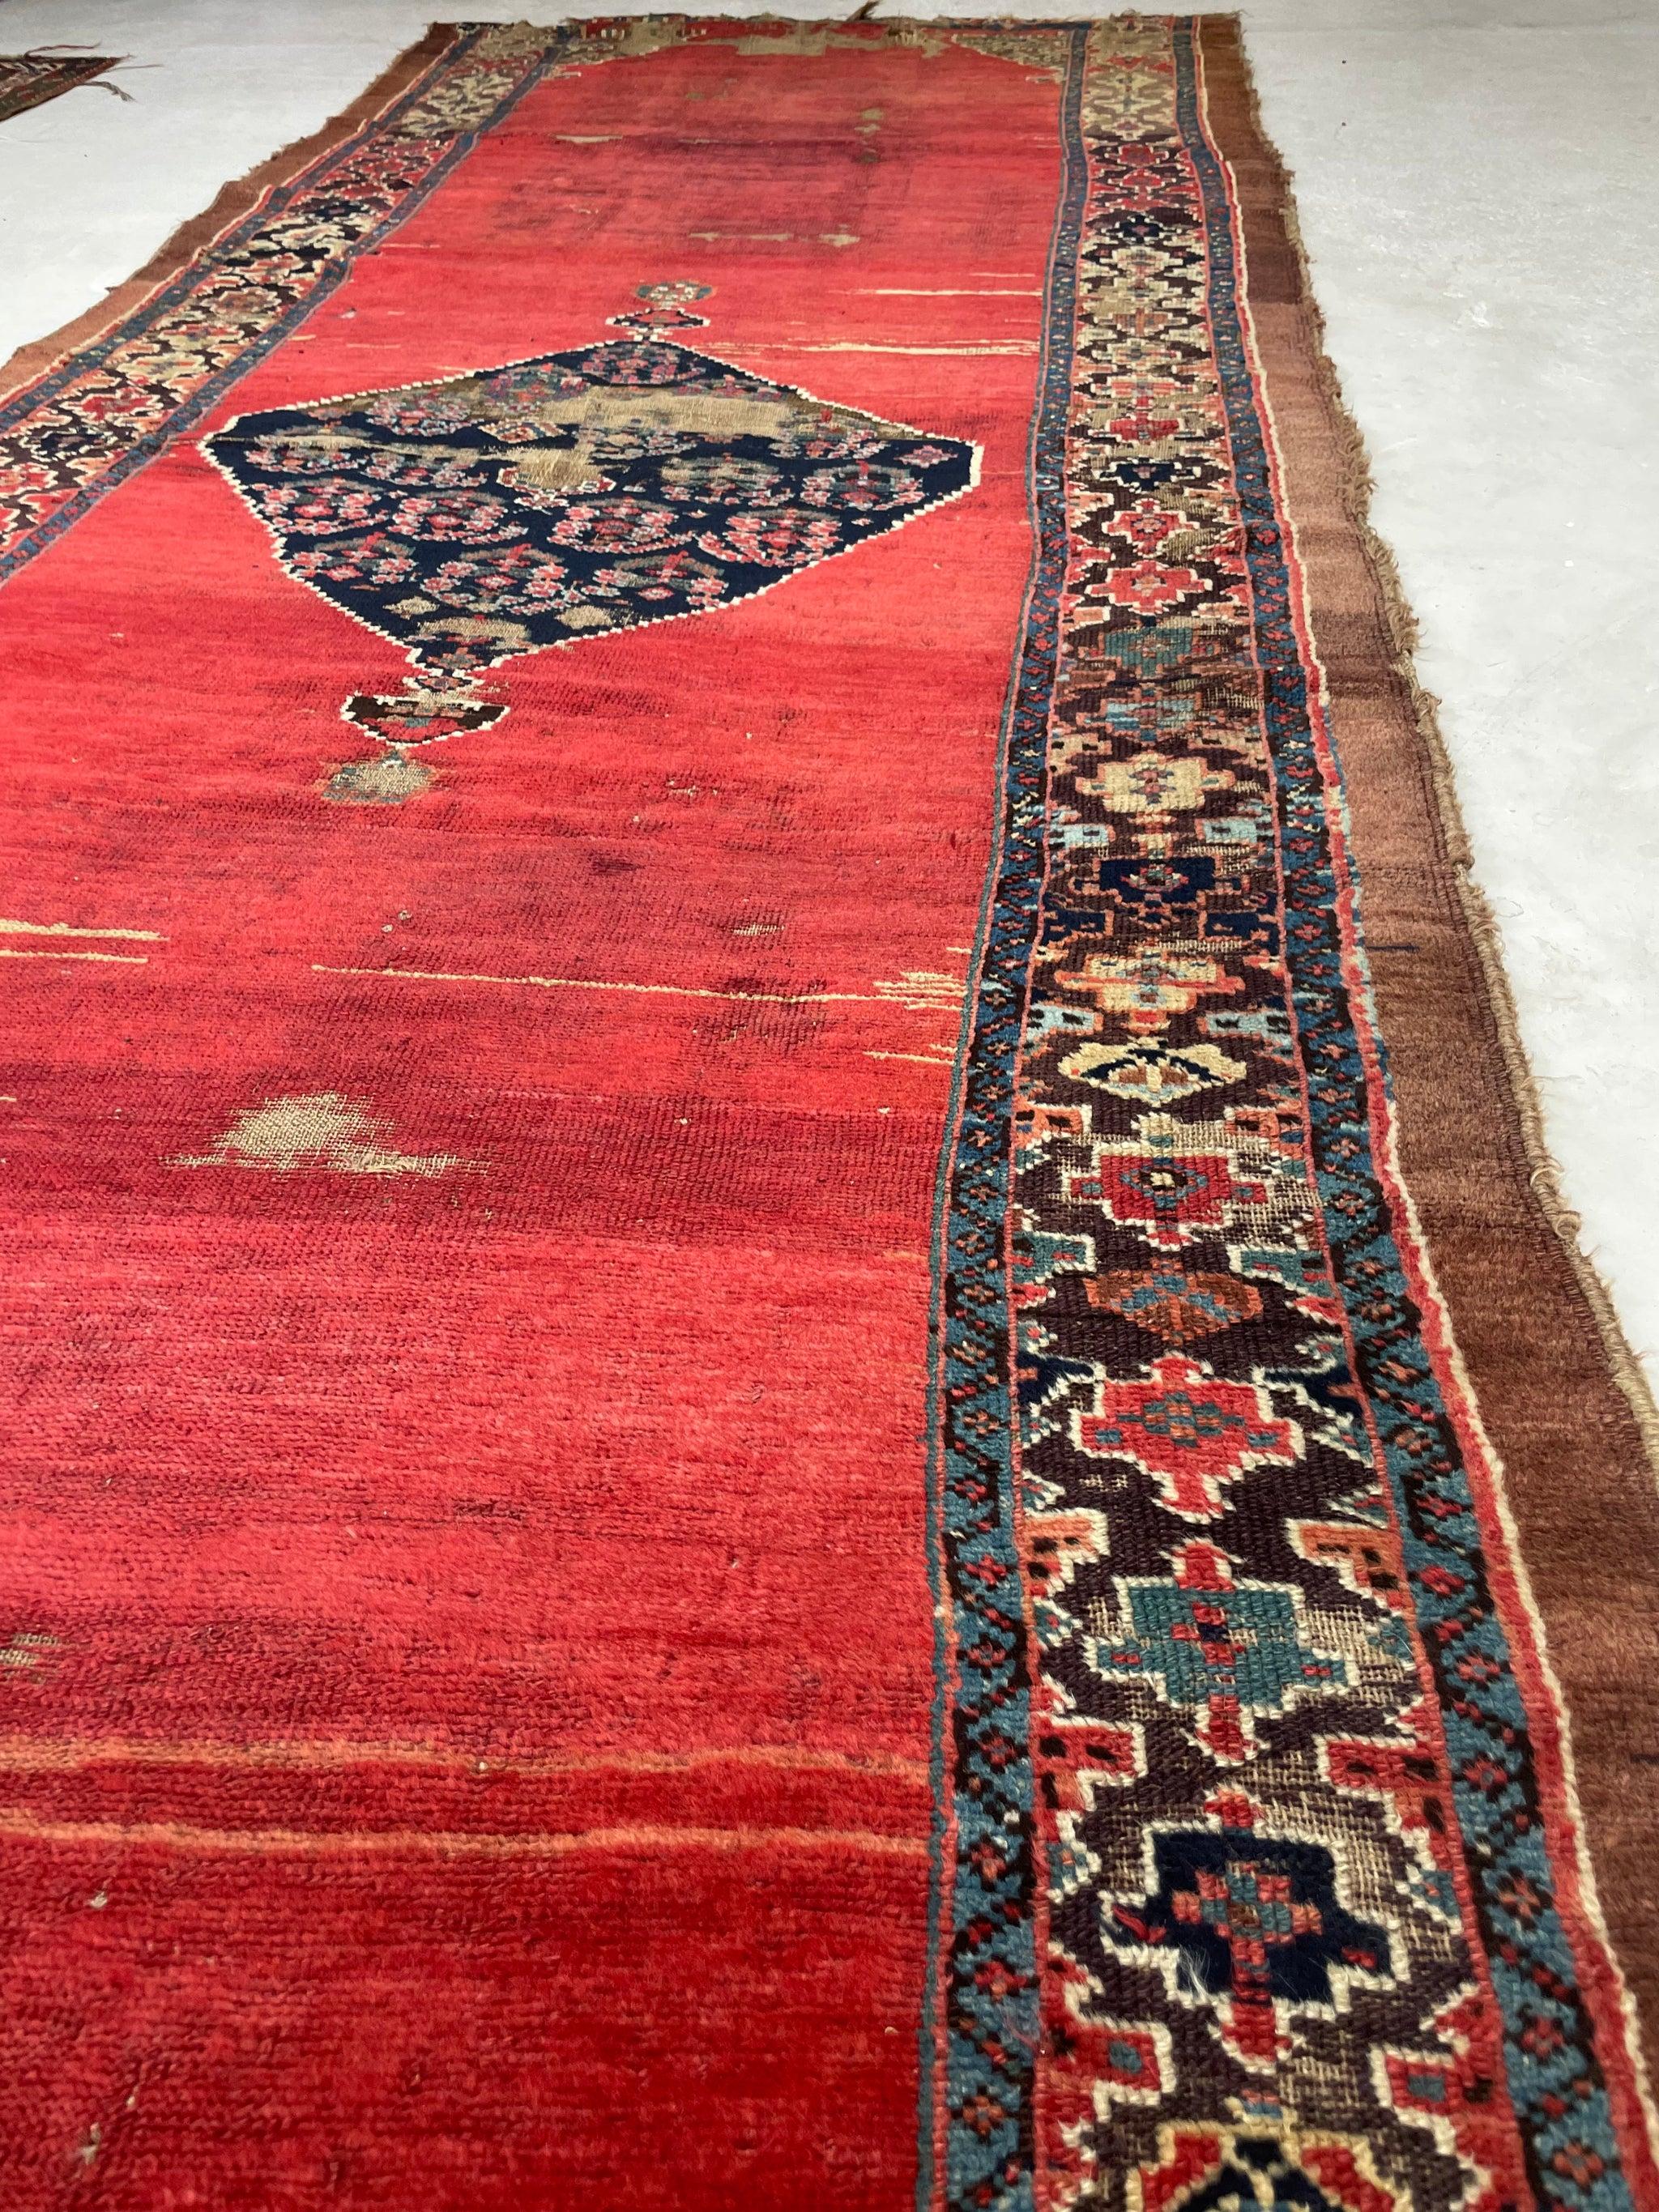 Late 19Th Century Ancient Kurdish Runner  Glorious Reds, Aubergine, Emerald Greens

About: WOW. For the Truest of Old Souls - lovers of character-rich objects with tons of energy. This is your piece.

Size:  4.3 x 11.10
Age:  Antique, Late 19th